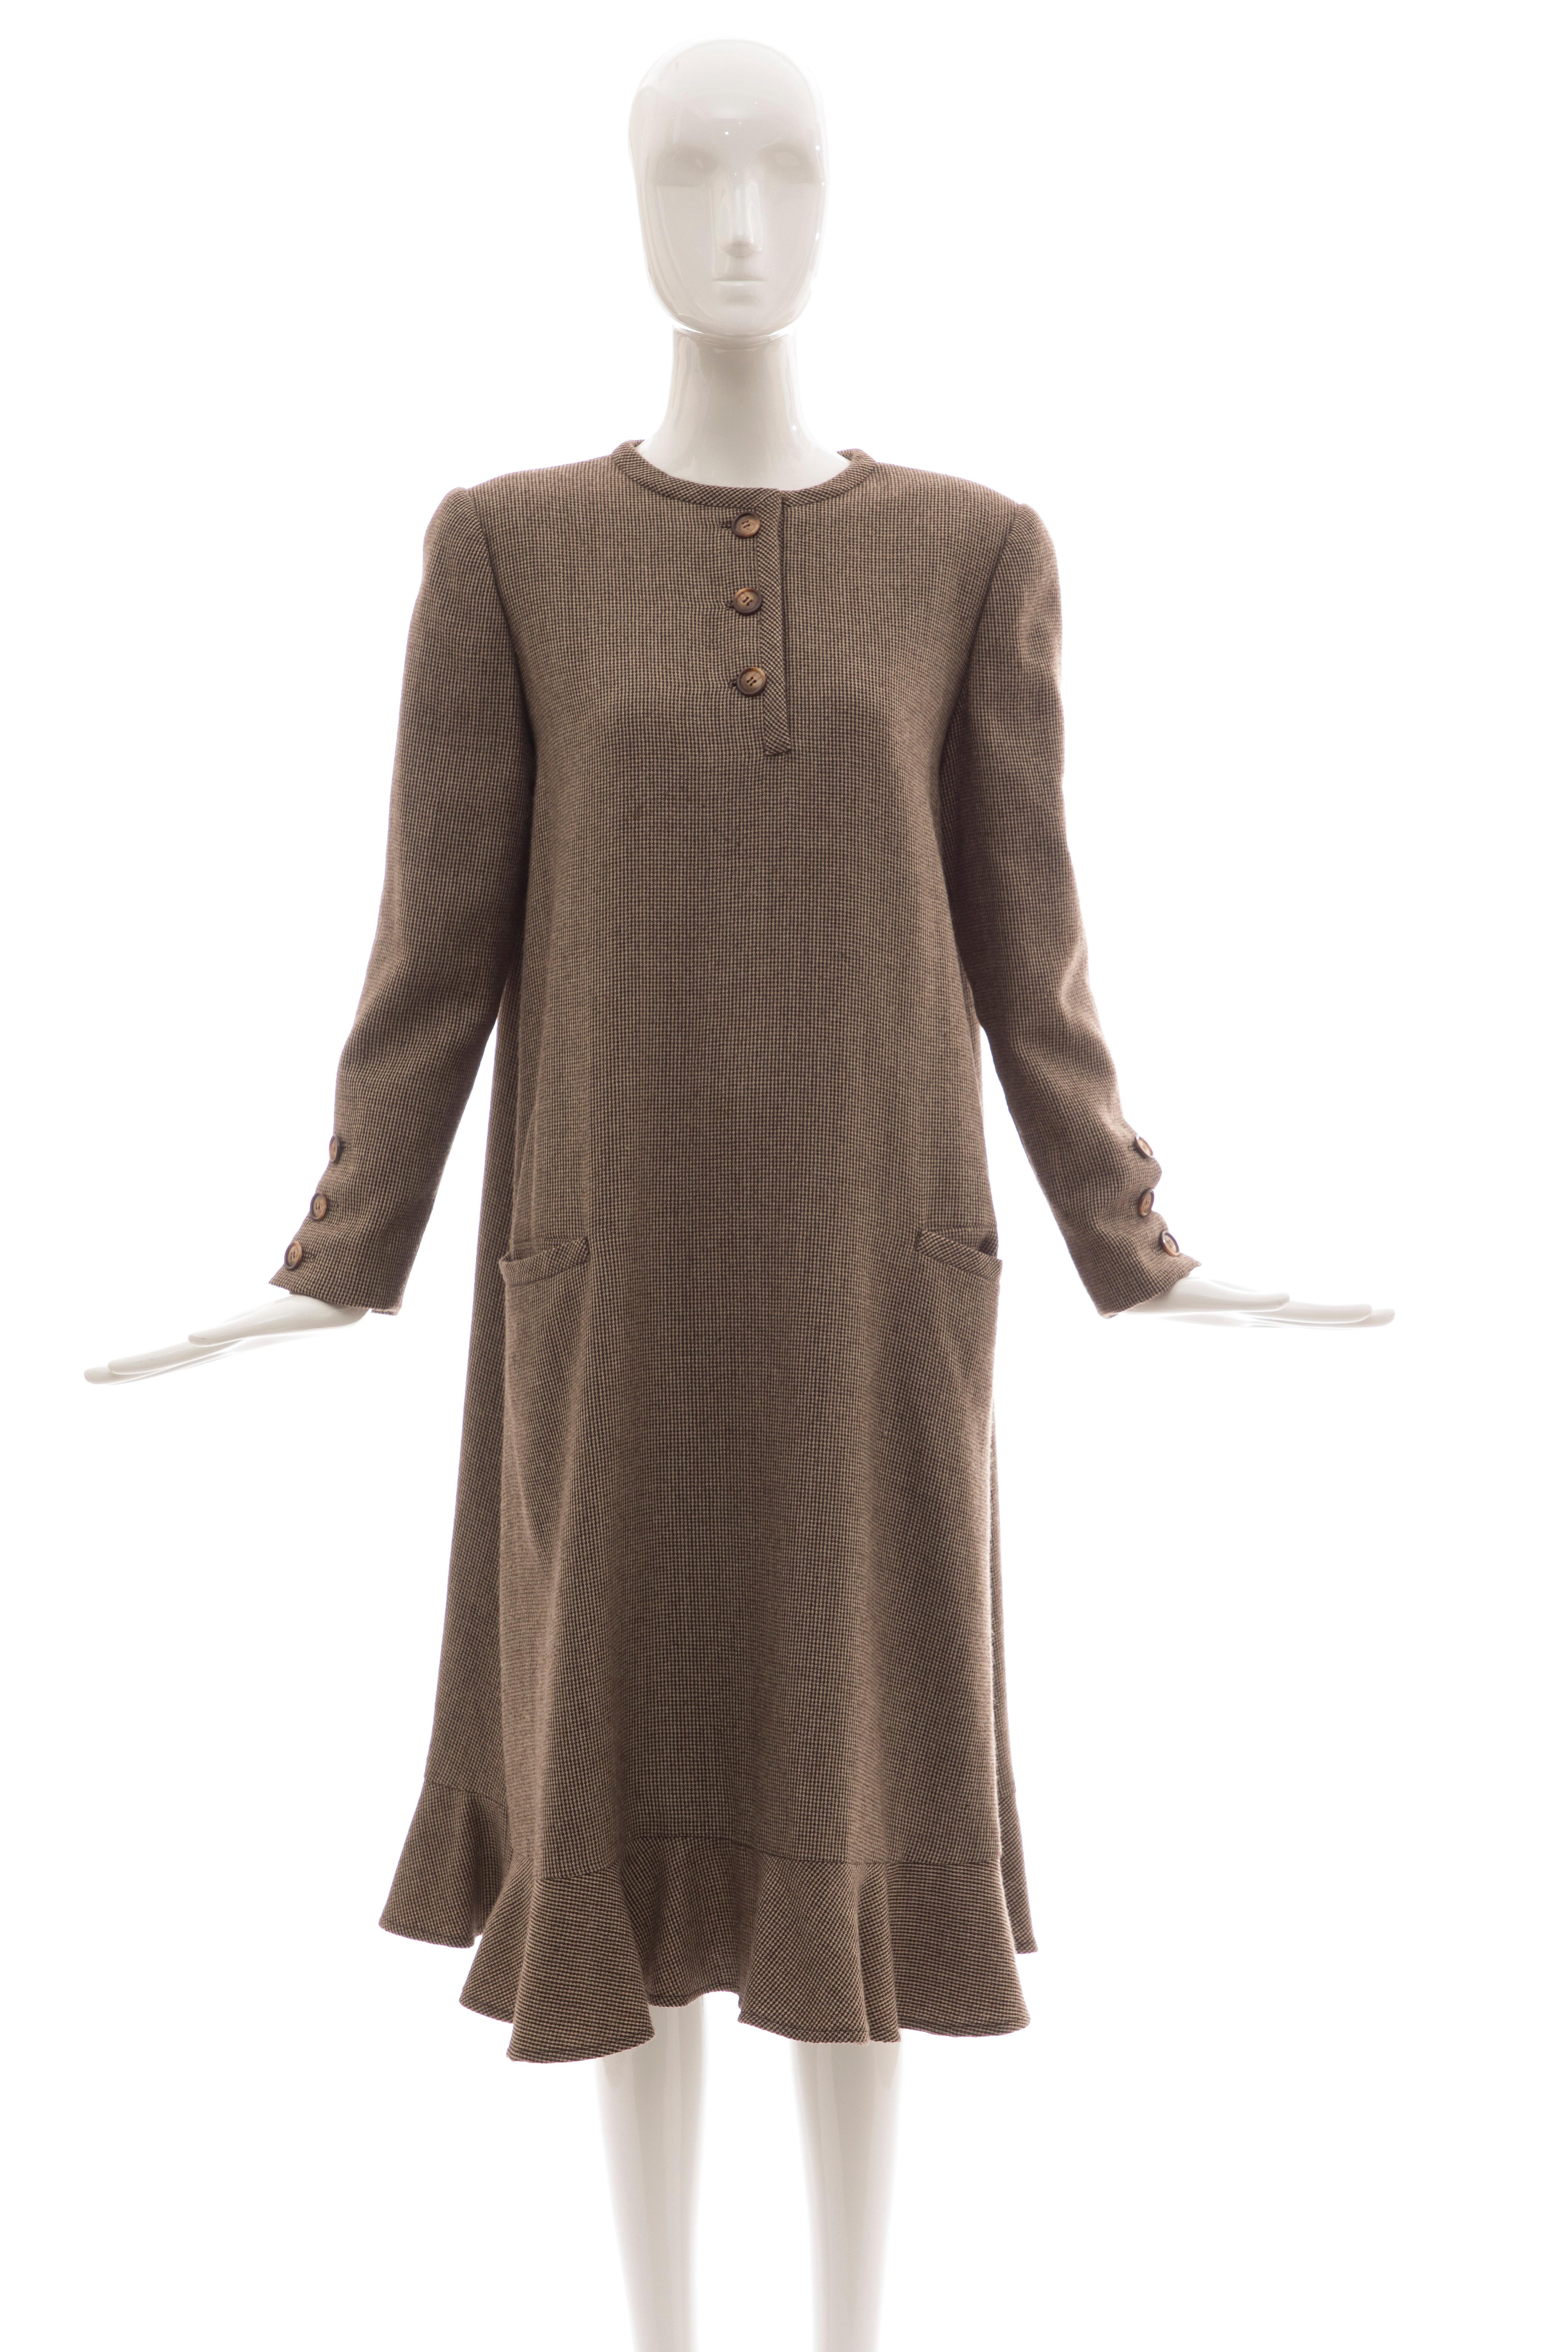 Bill Blass Brown Wool Tweed A Line Button Front Dress, Circa: 1970's For Sale 10